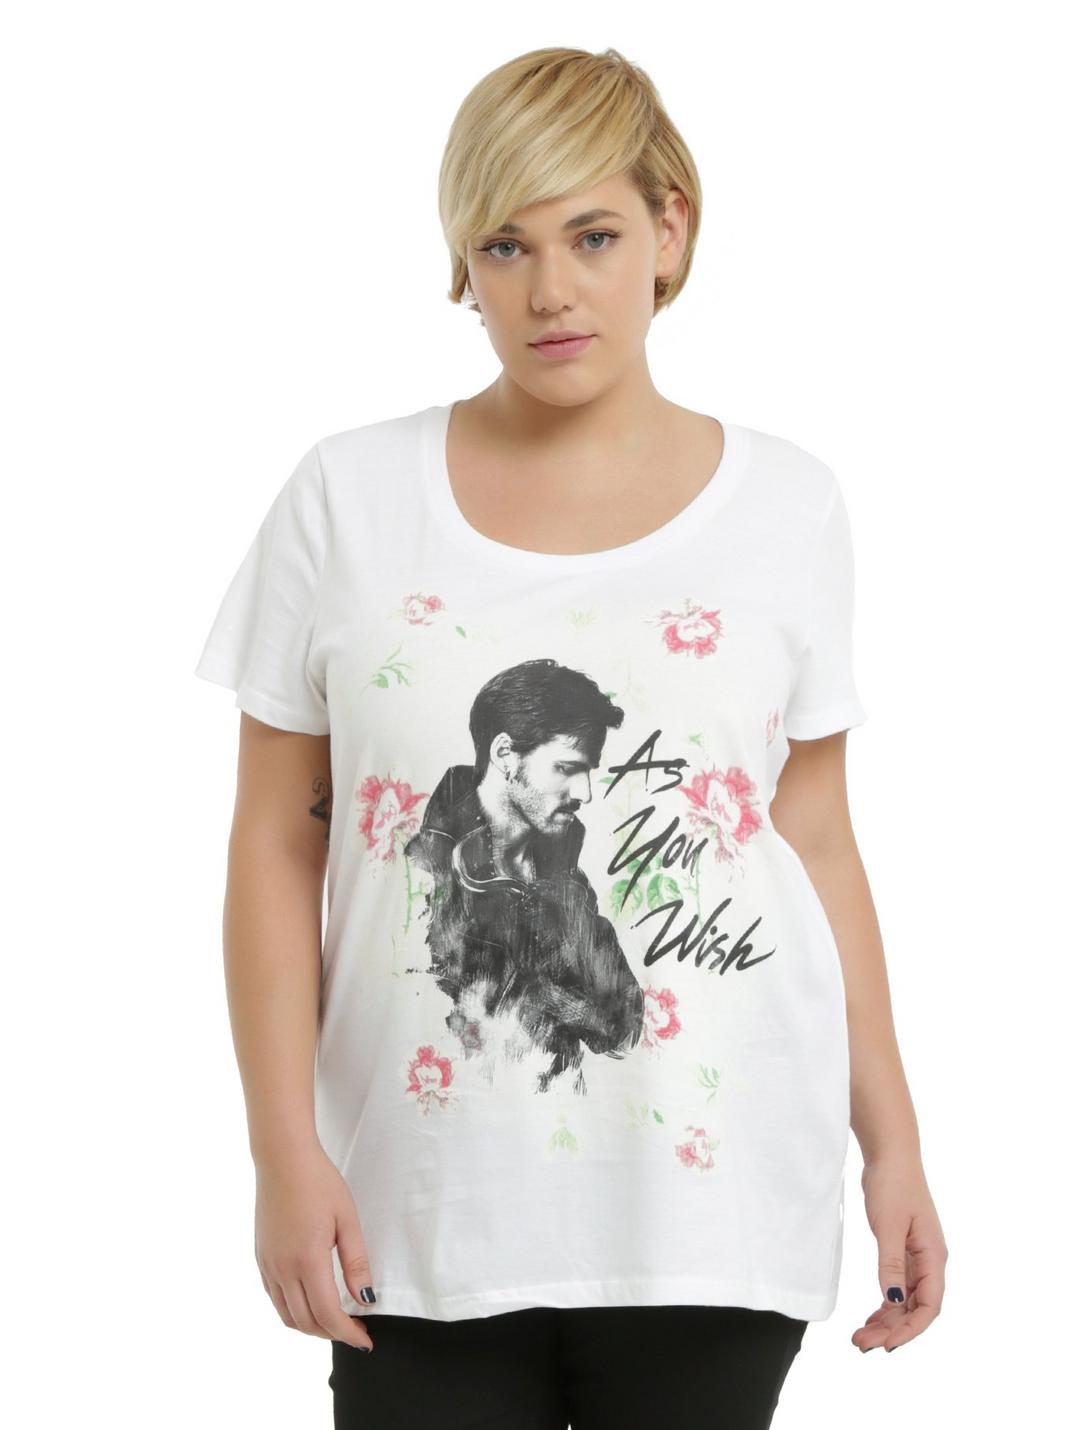 Once Upon A Time Girls T-Shirt Plus Size, WHITE, hi-res